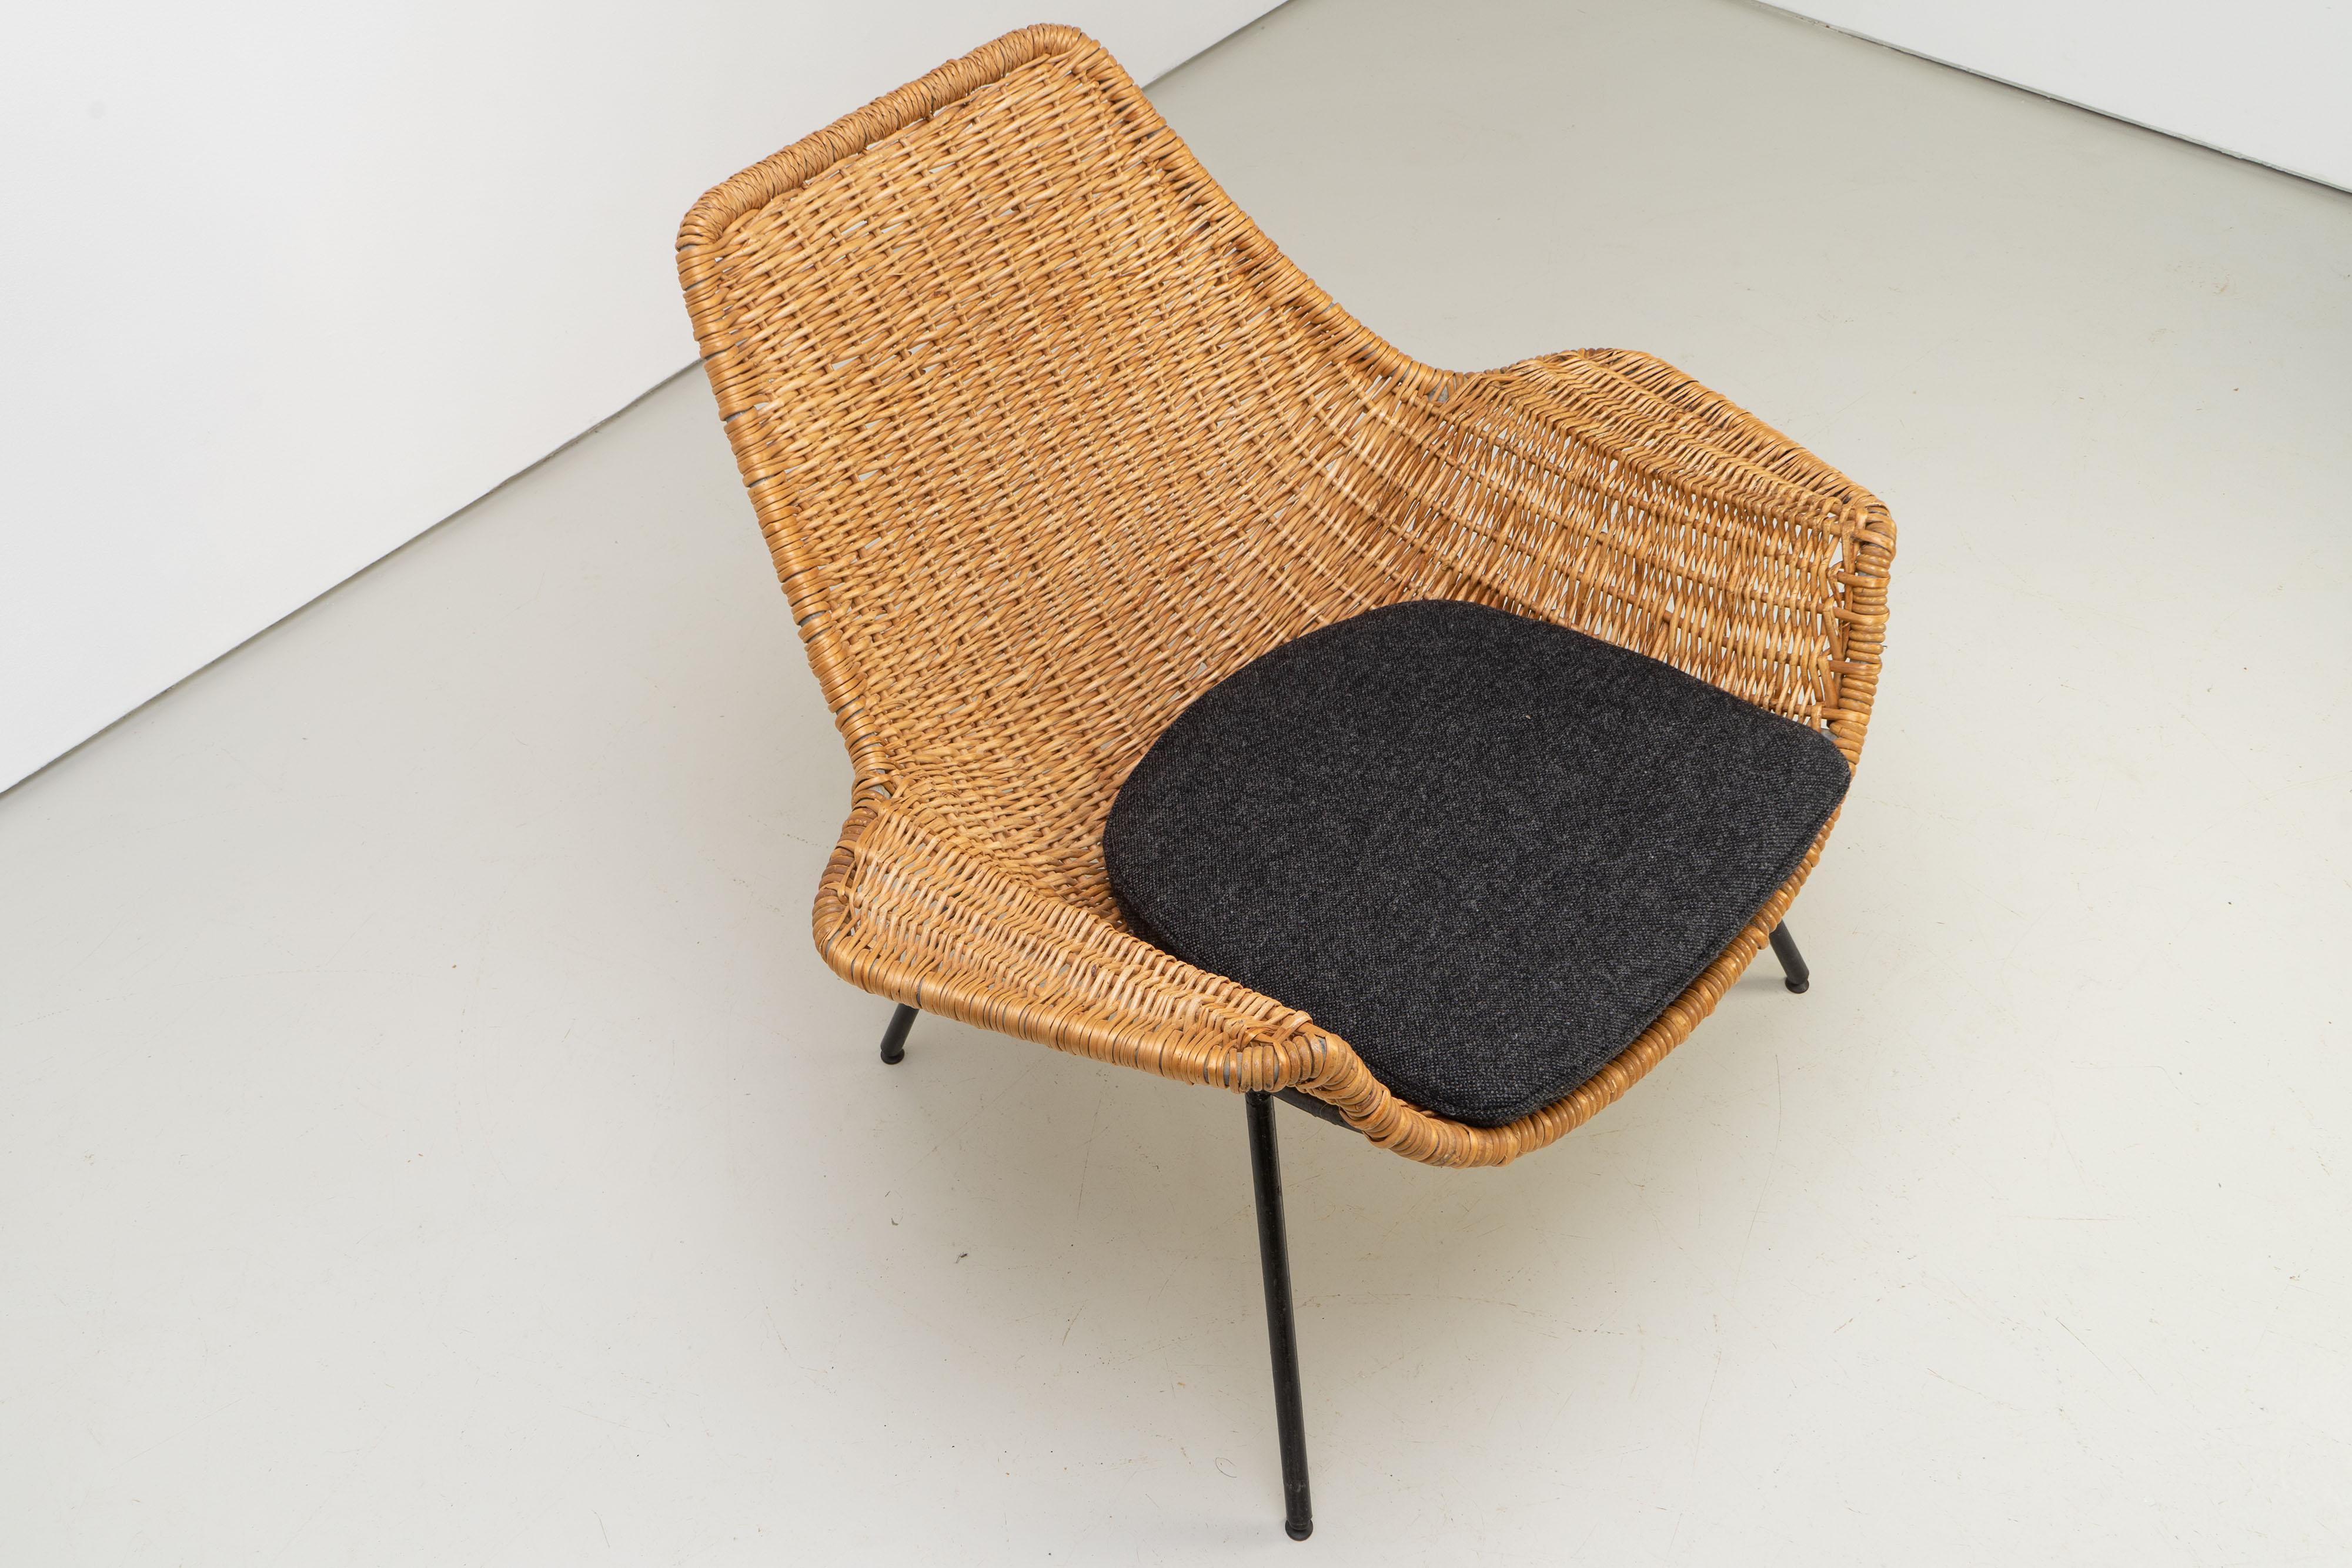 20th Century Mid-Century Modern Rattan Lounge Chair by Giancarlo De Carlo, Italy, 1954 For Sale